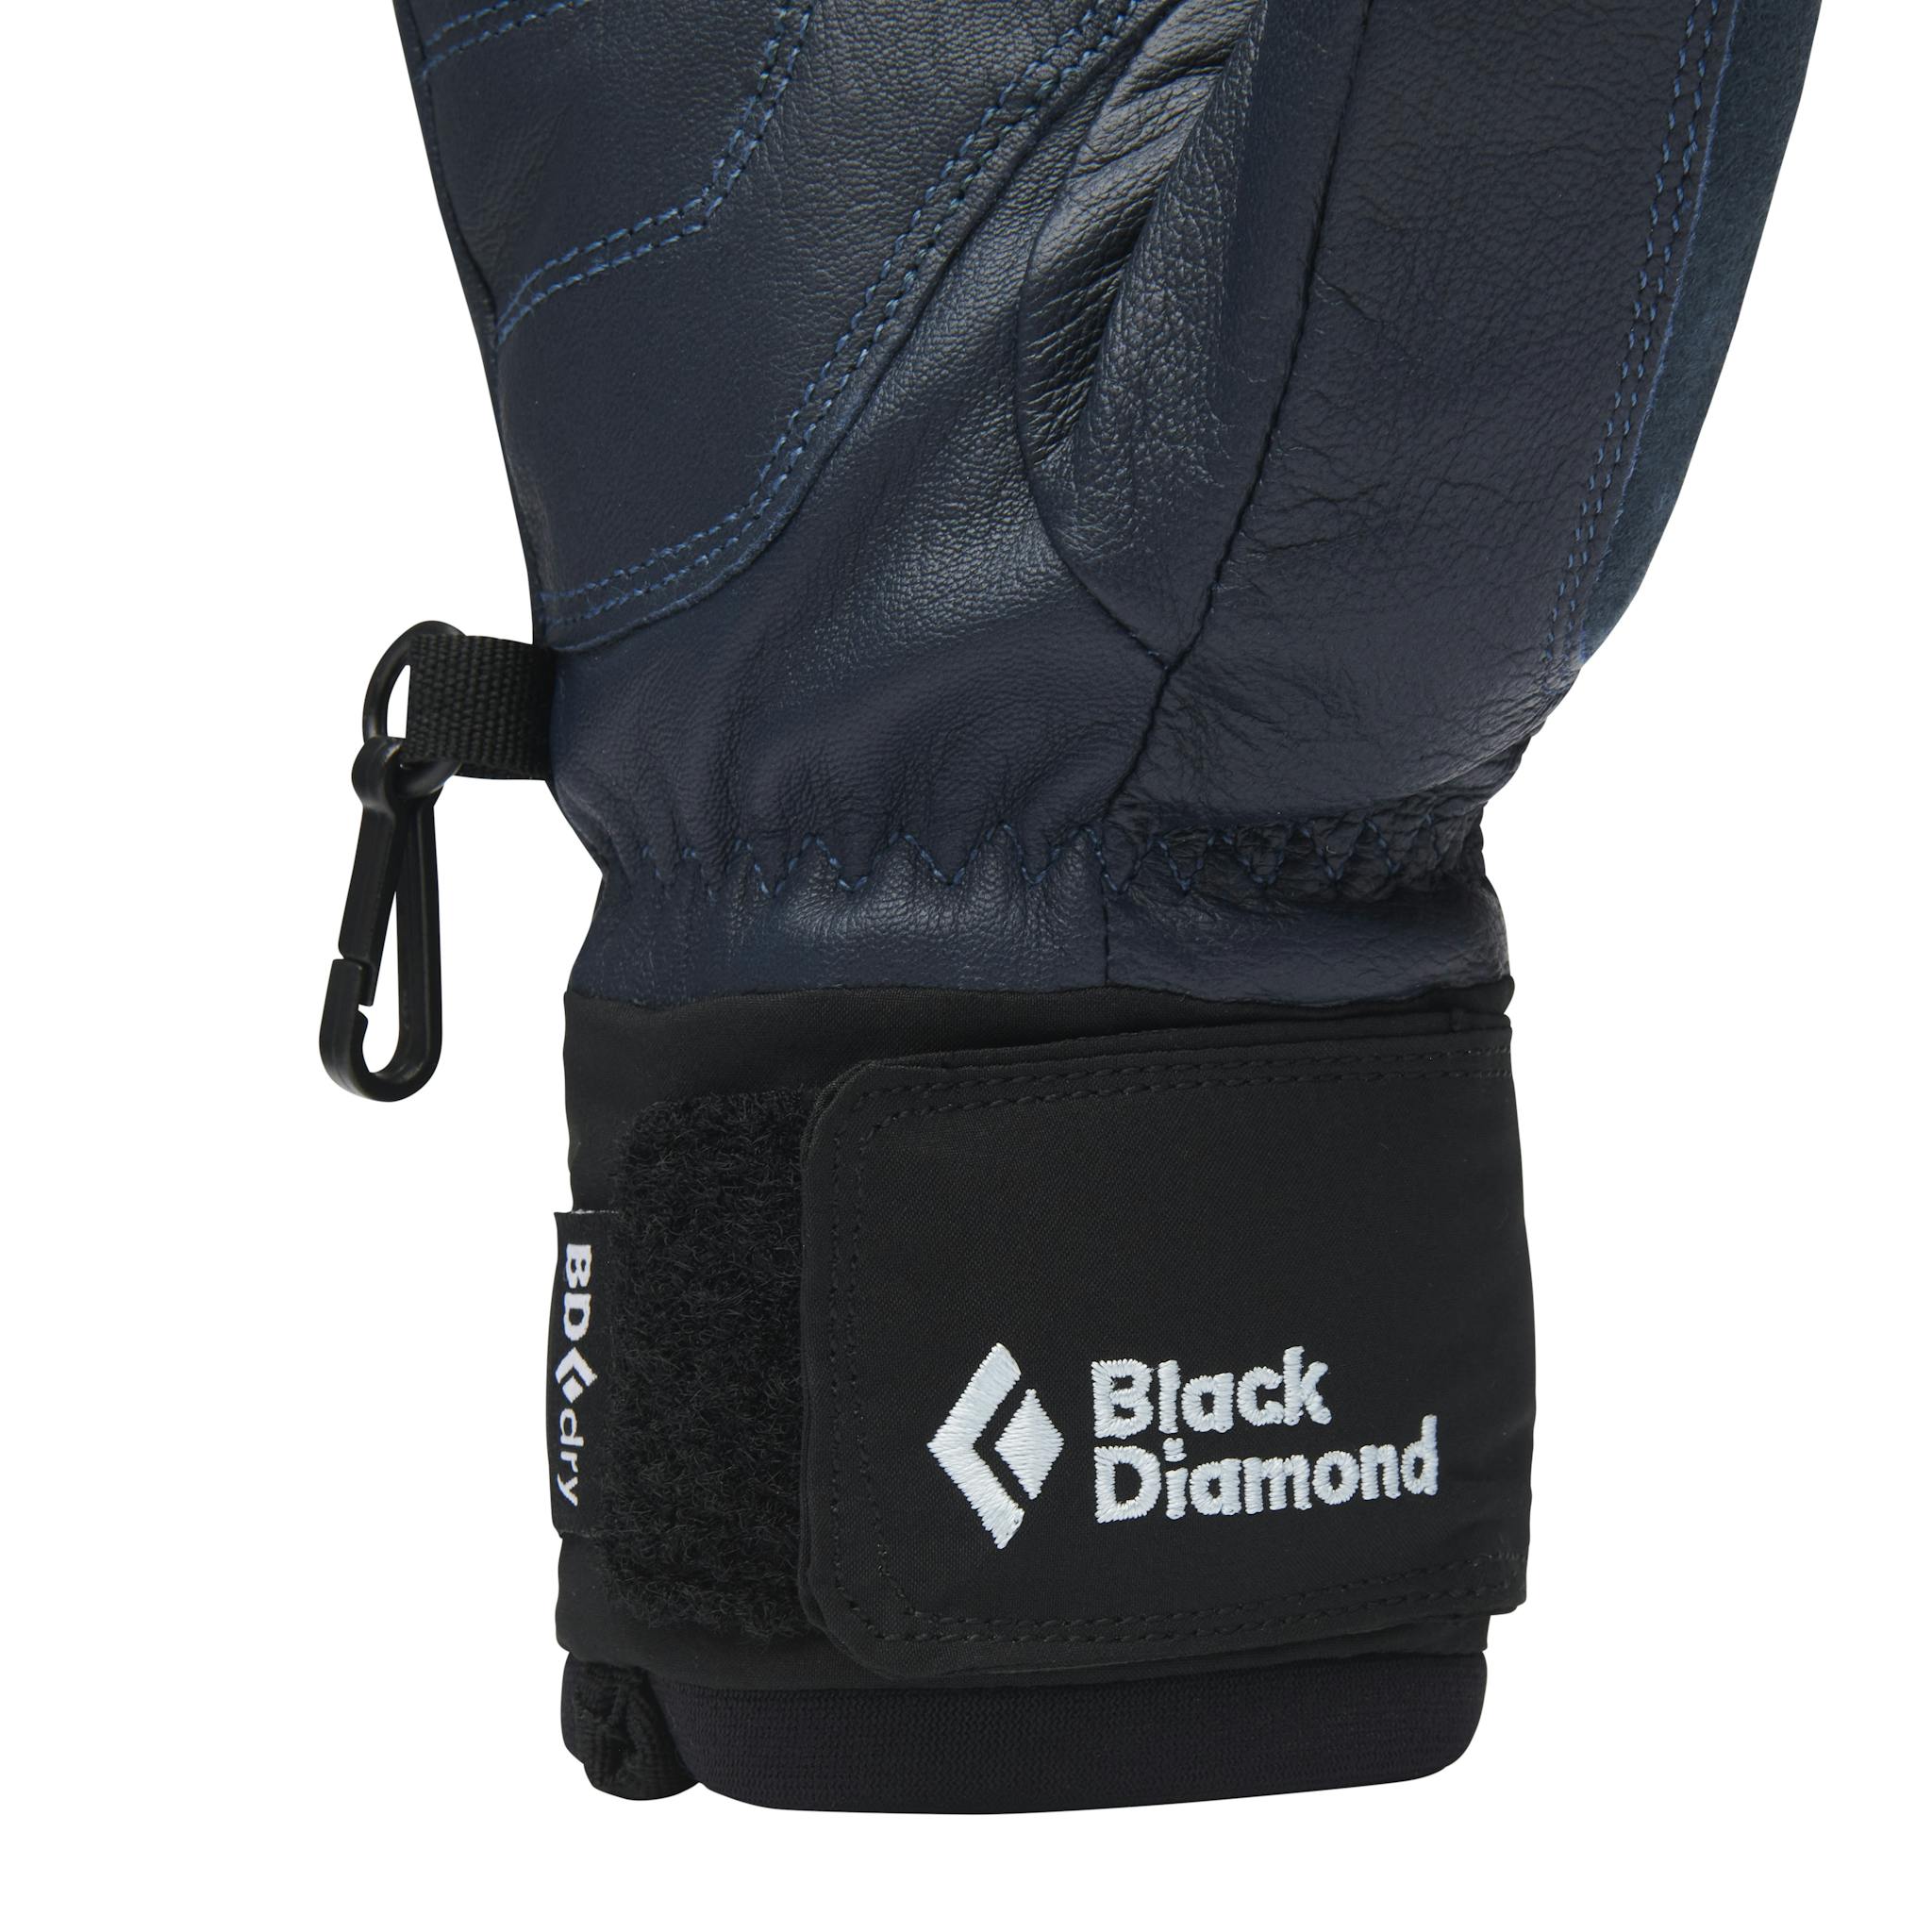 Under the jacket, neoprene Freeride Cuff for secure fit